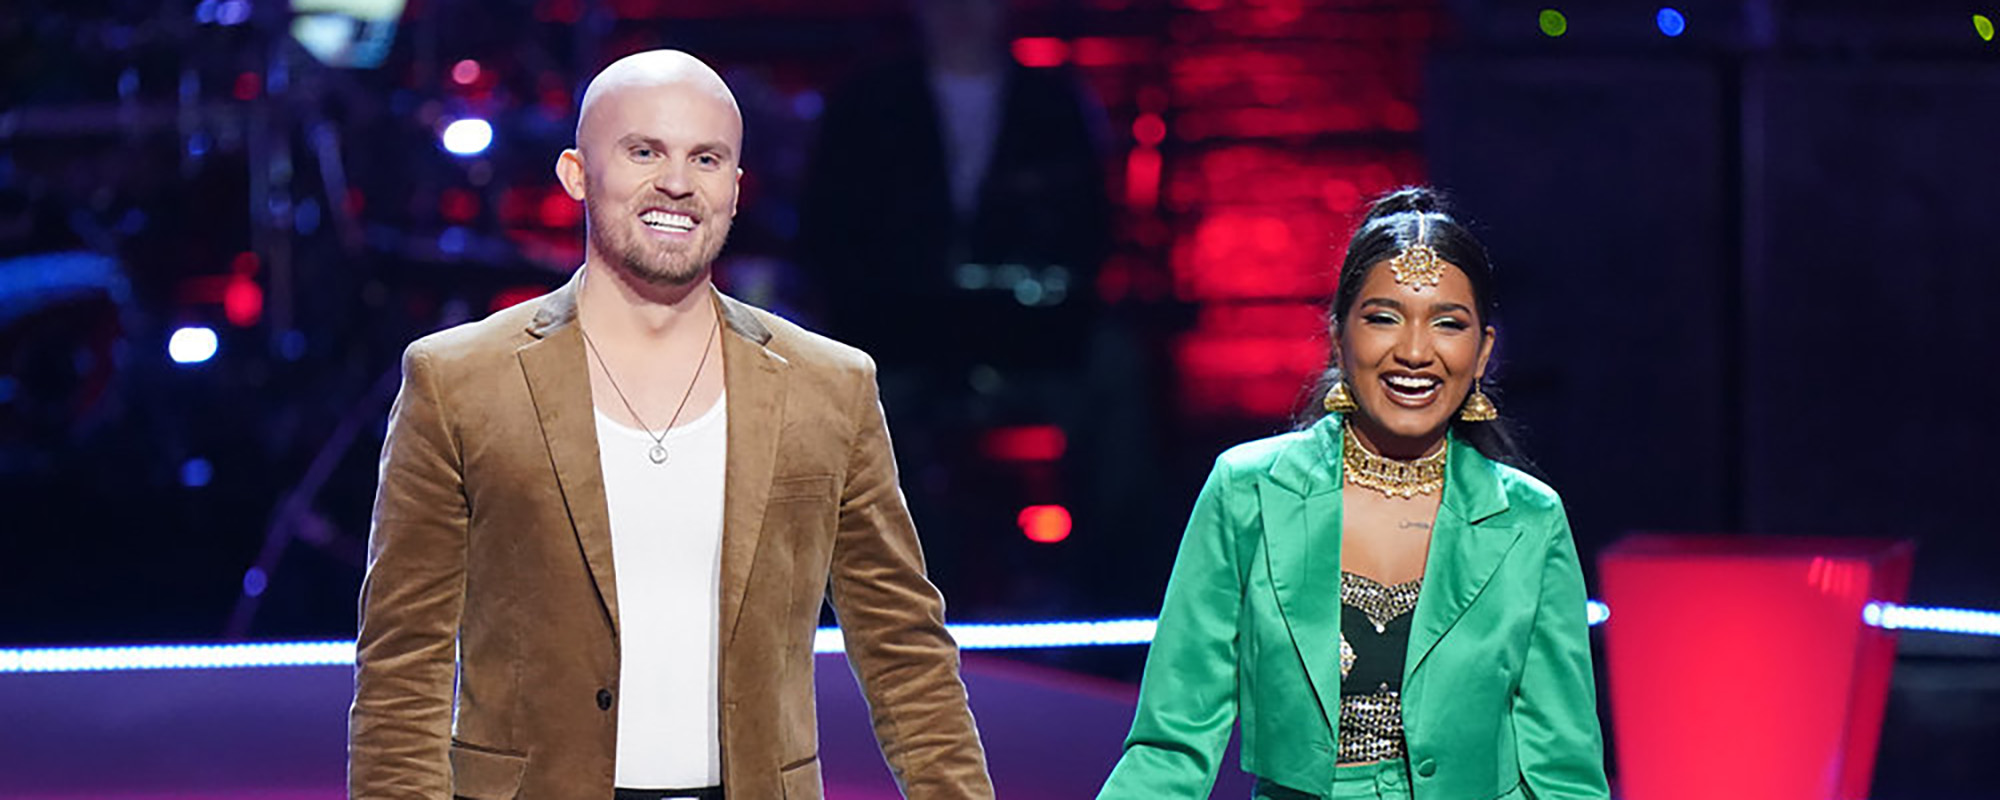 EJ Michels and Tasha Jessen Face Off on ‘The Voice’ Battle Rounds